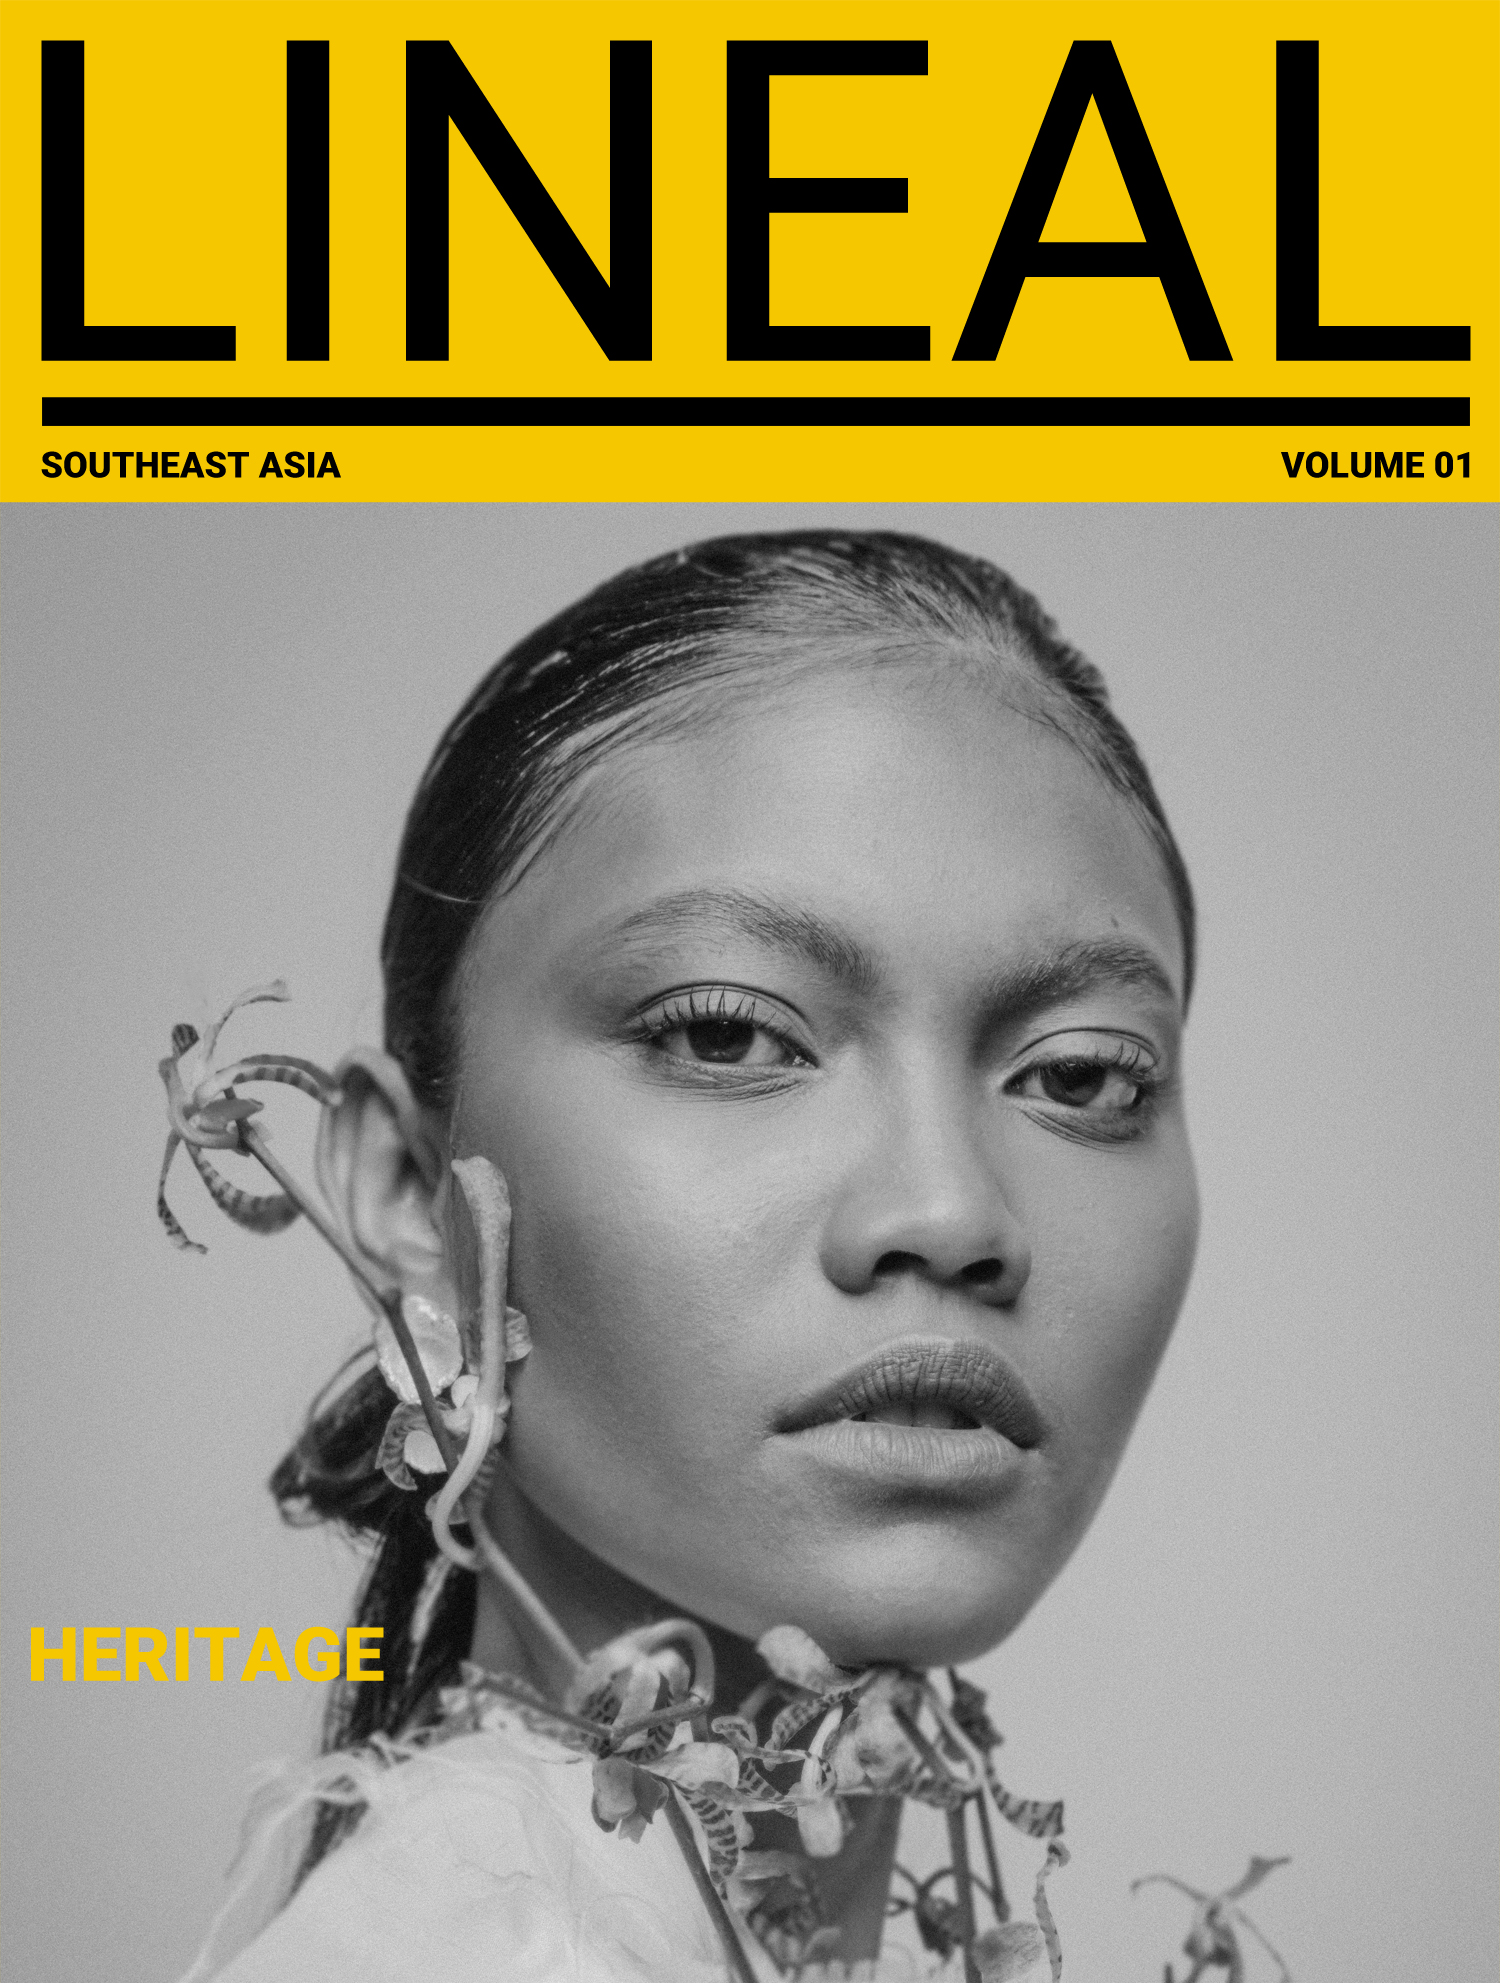 LINEAL – Heritage